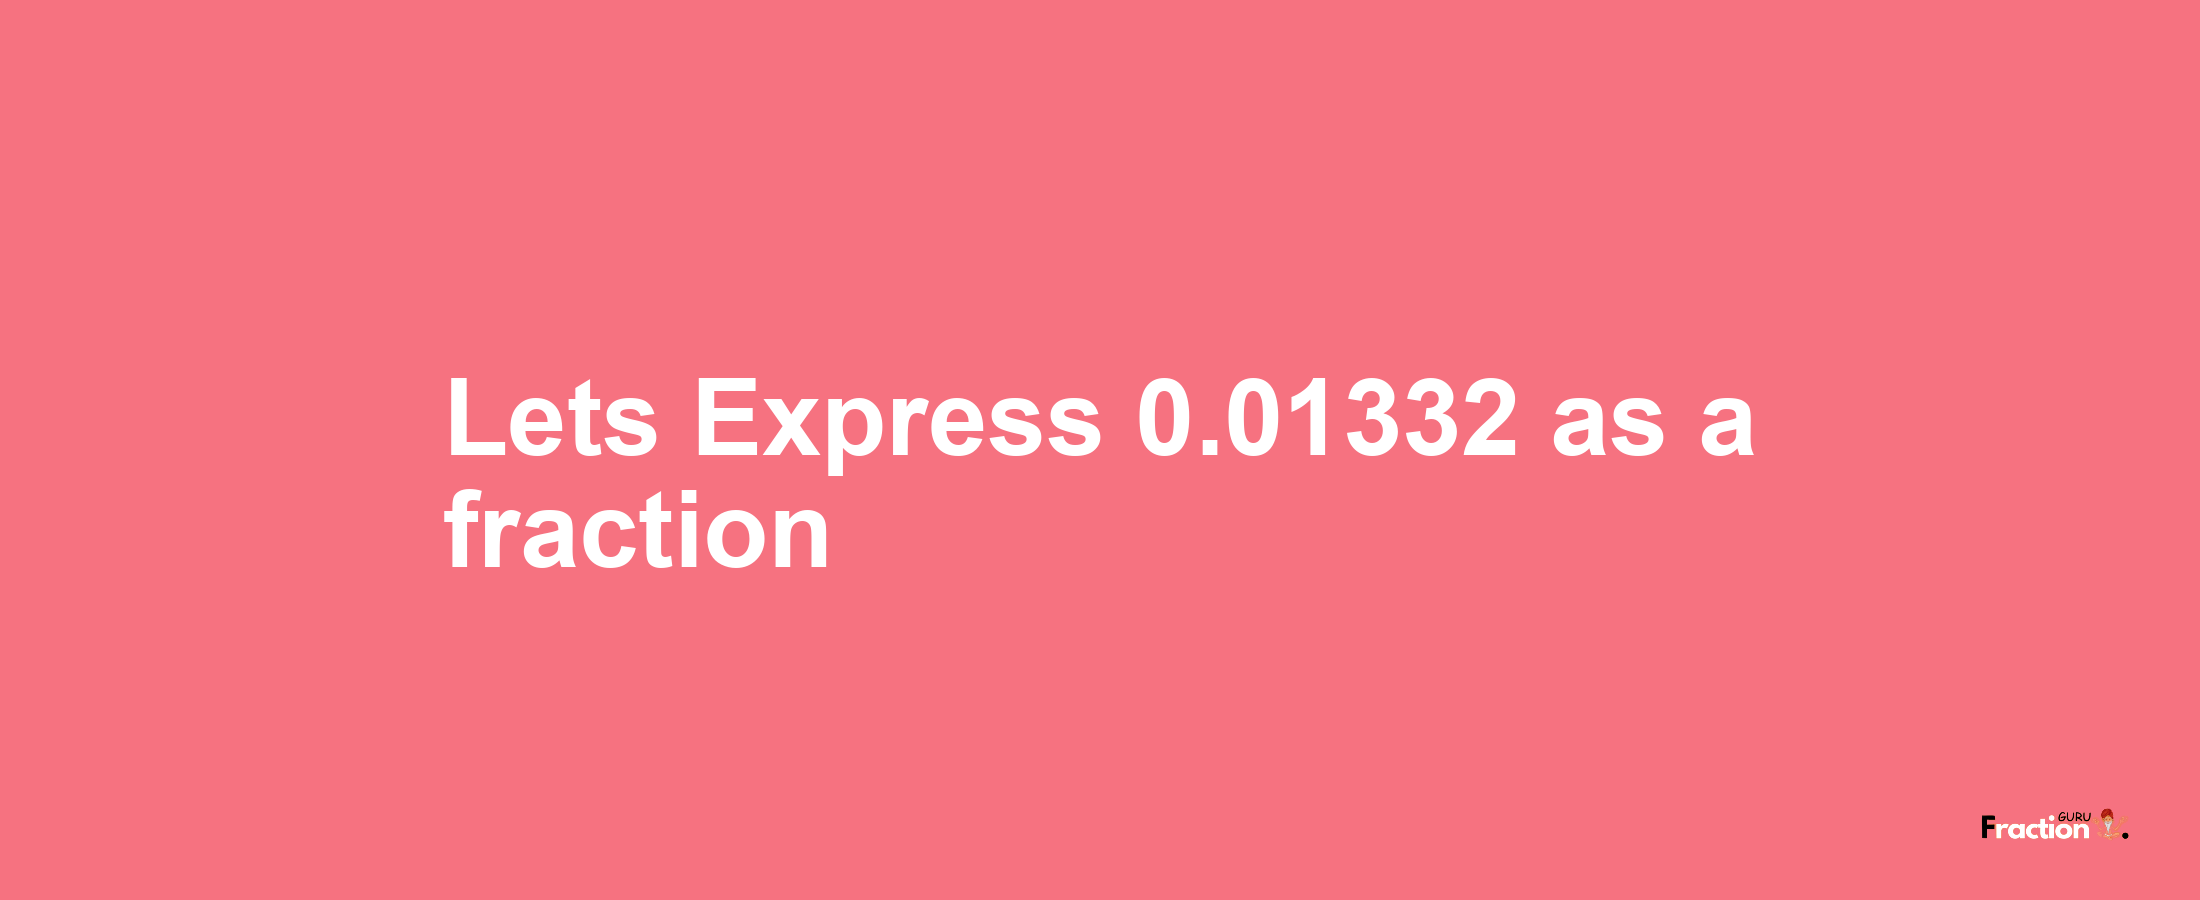 Lets Express 0.01332 as afraction